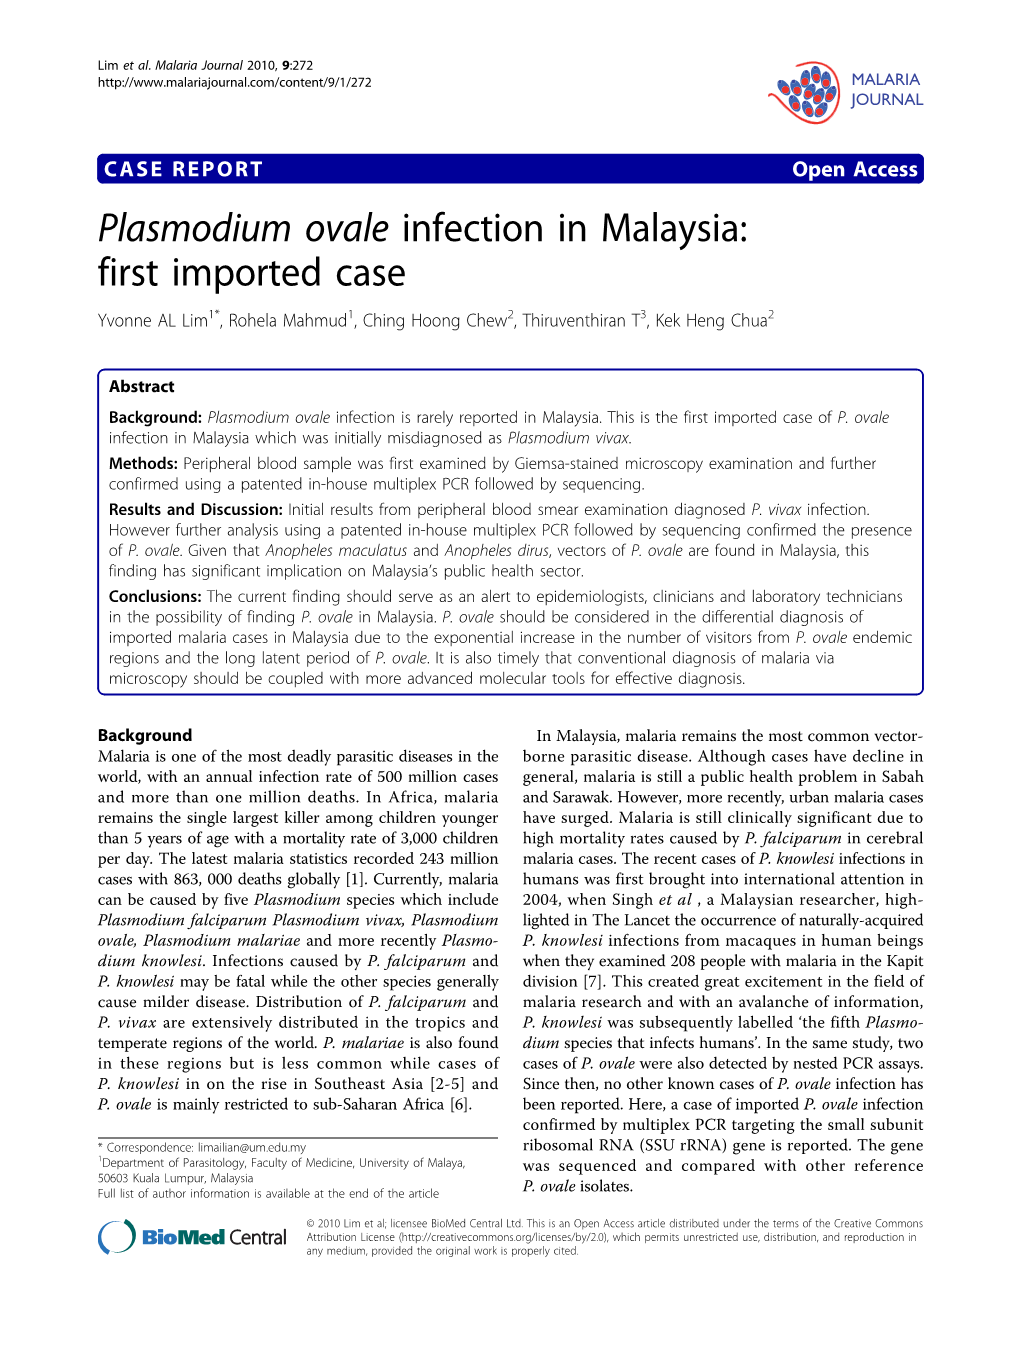 Plasmodium Ovale Infection in Malaysia: First Imported Case Yvonne AL Lim1*, Rohela Mahmud1, Ching Hoong Chew2, Thiruventhiran T3, Kek Heng Chua2